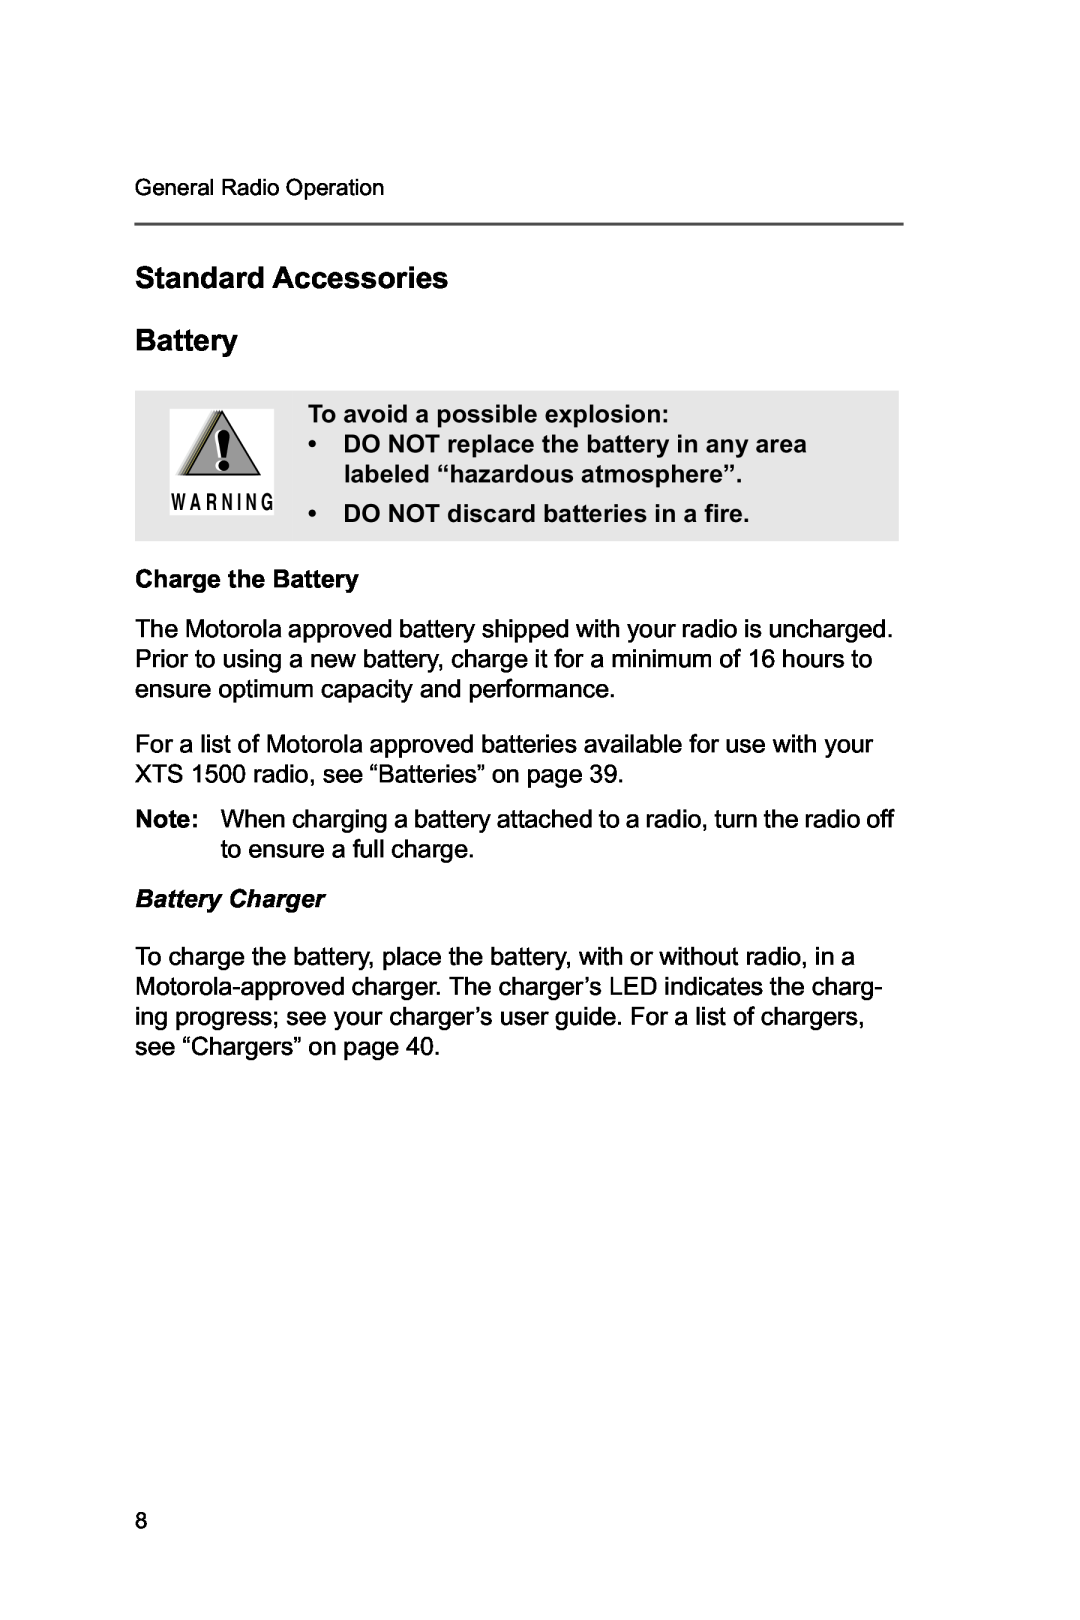 Motorola XTSTM 1500 manual Standard Accessories, Battery, To avoid a possible explosion, DO NOT discard batteries in a fire 